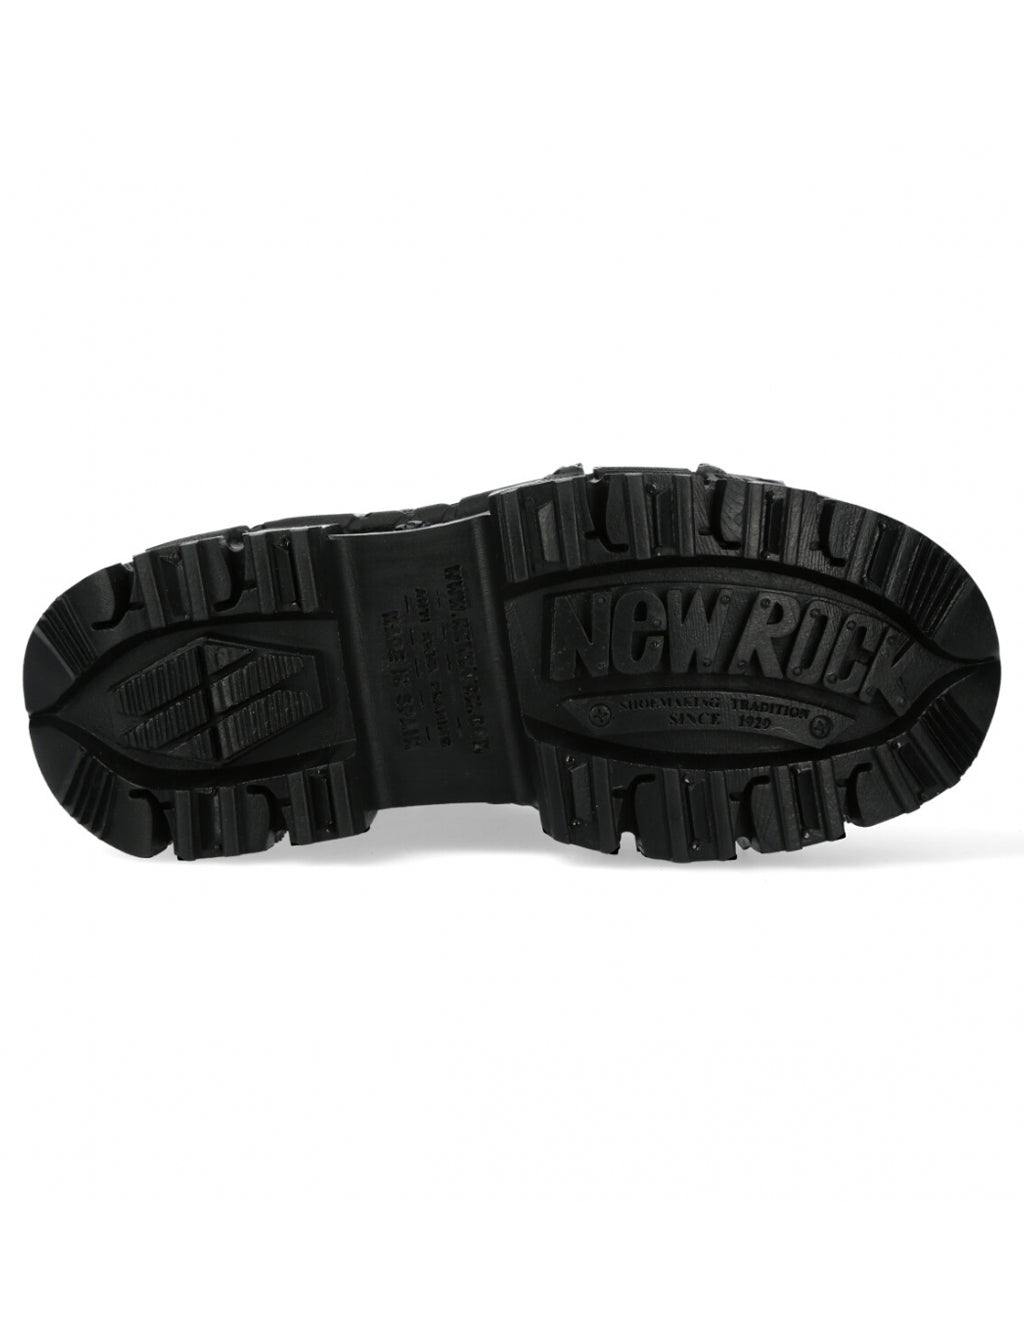 NEW ROCK M-WALL285-S2 ✰ PRE ORDER ✰